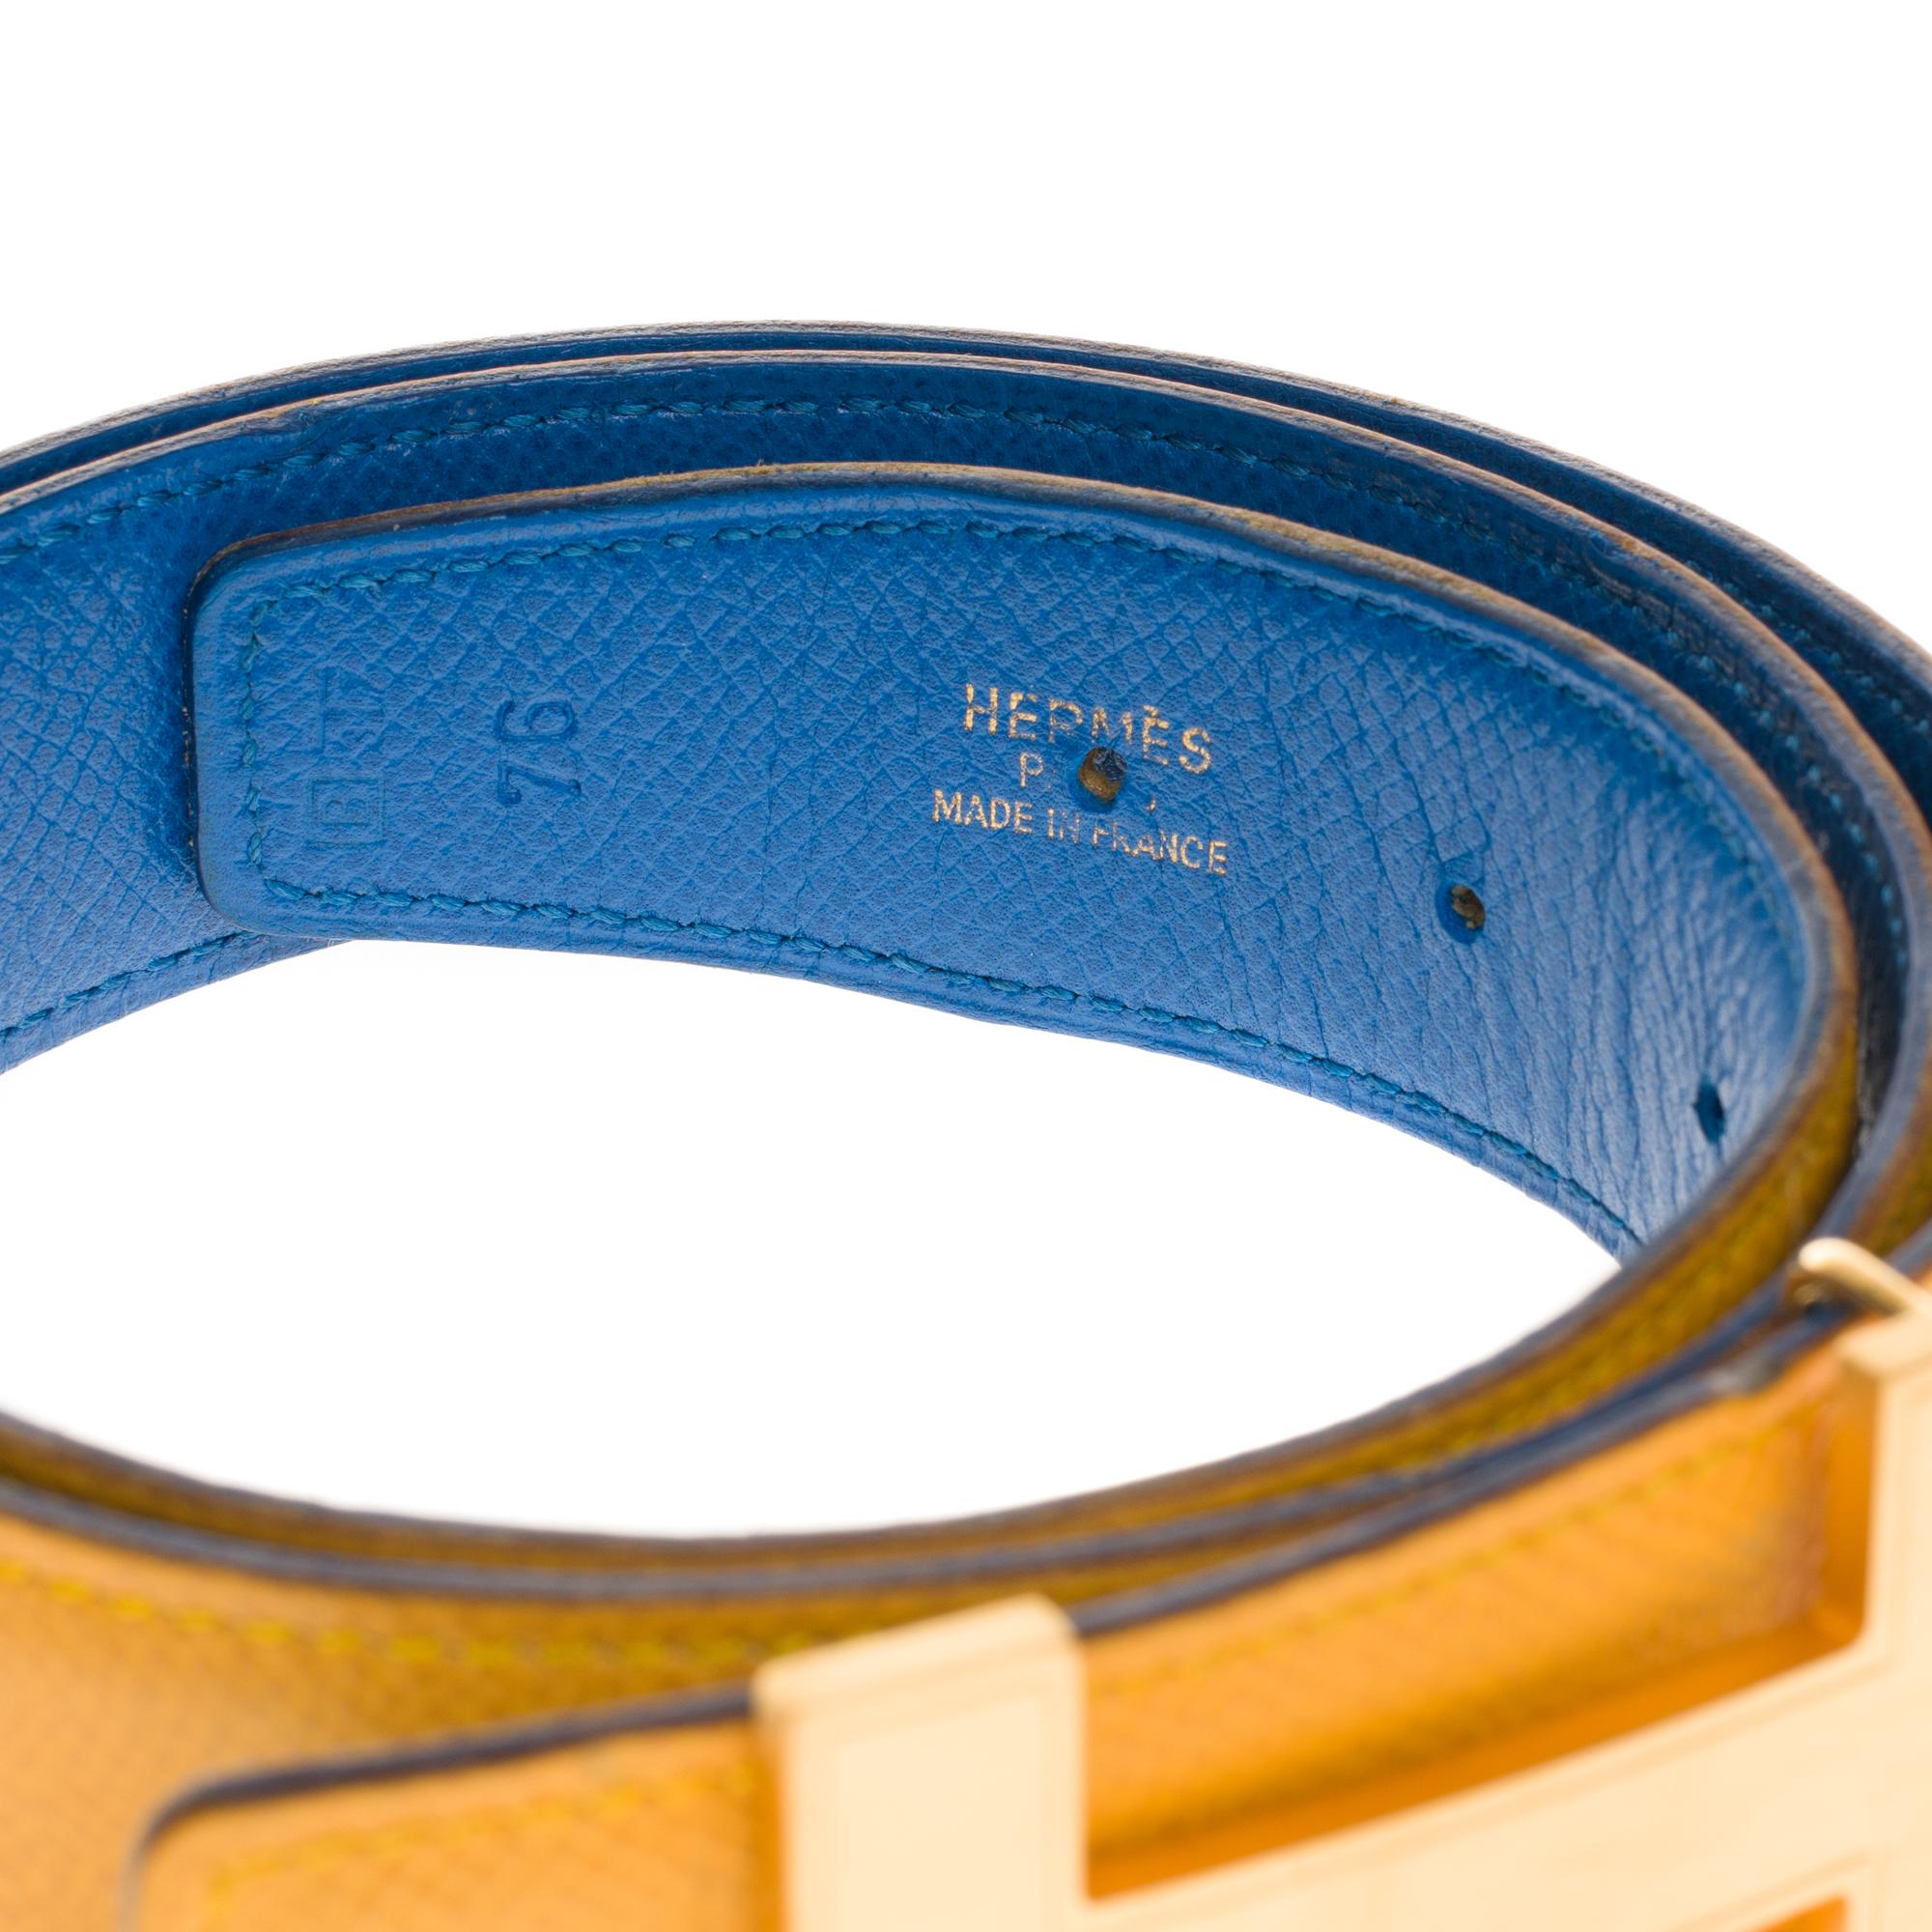 Hermes Reverso belt in reversible leather epsom yellow and blue
Size: 75 cm
Signature: Hermès Paris, Made in France
Buckle Quizz in brushed gold
Dimensions: 3 cm * 75 cm
Sold with dustbag buckle

Very good condition despite some marks of use on